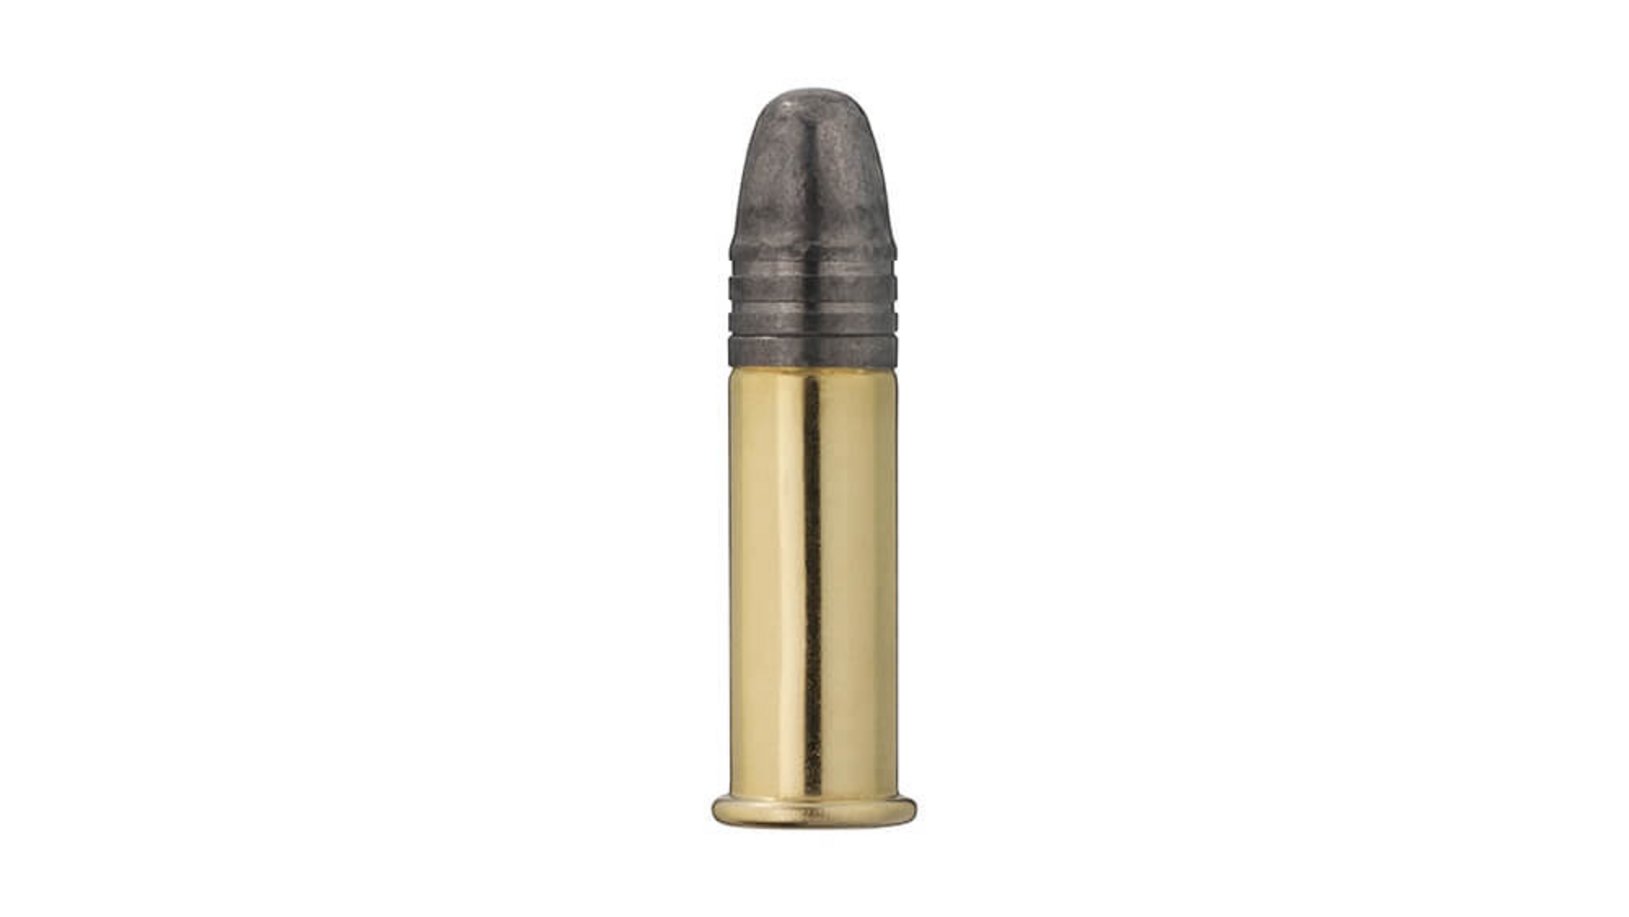 Frontview of ammunition of GECO .22 RIFLE 2,6g